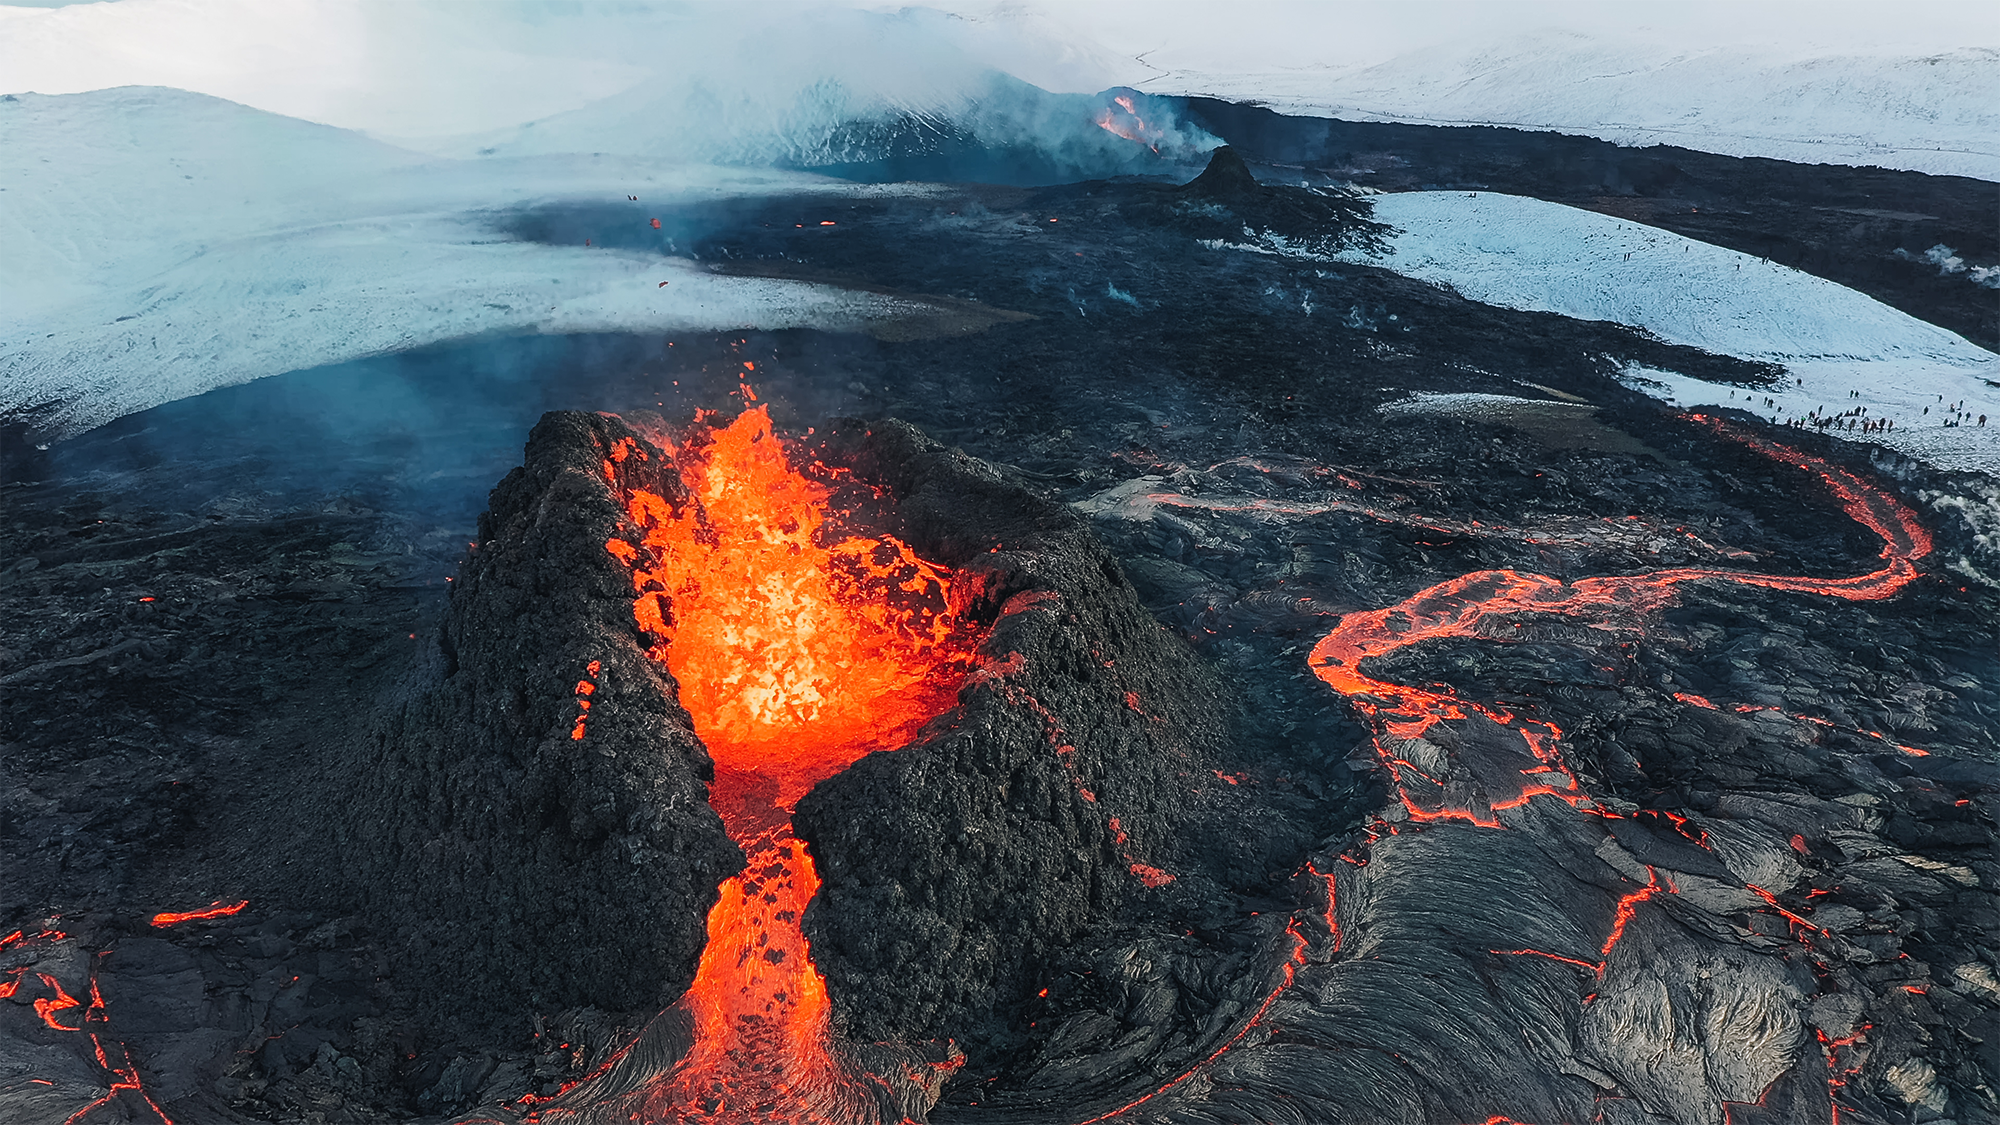 'Floating' magma offers clues about the strength of volcanoes